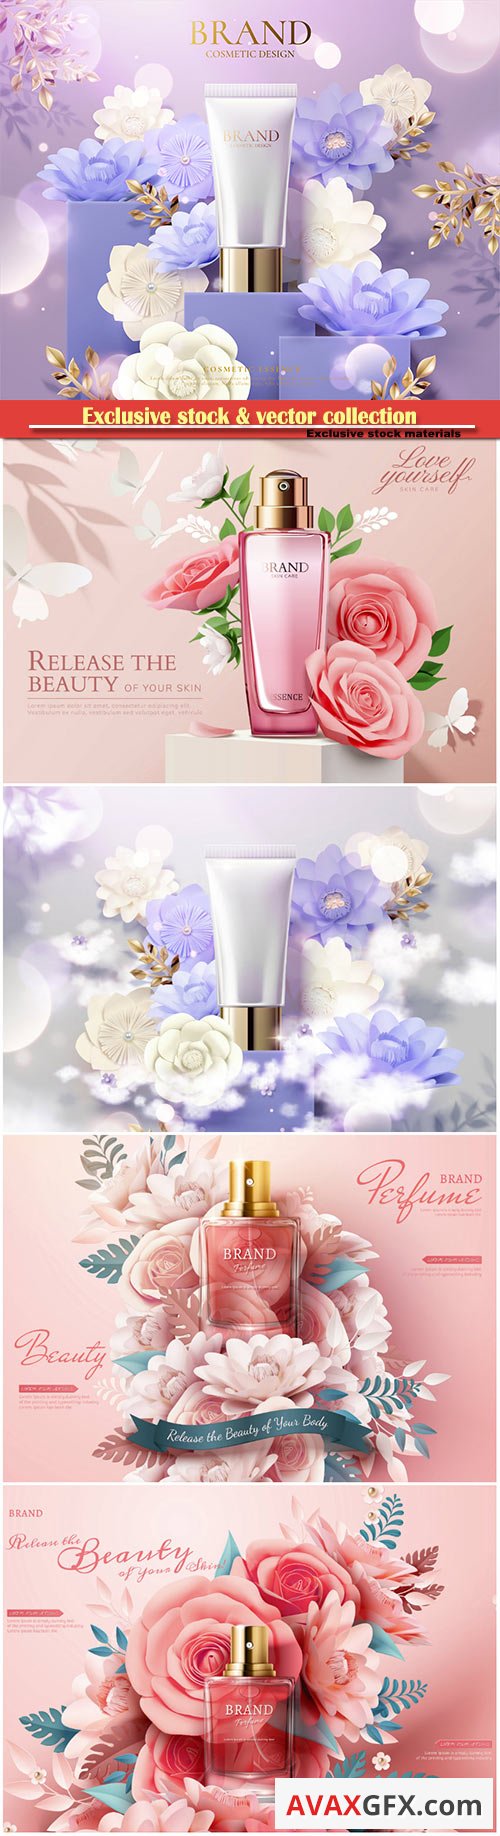 Cosmetic set ads with paper flowers in 3d illustration # 4